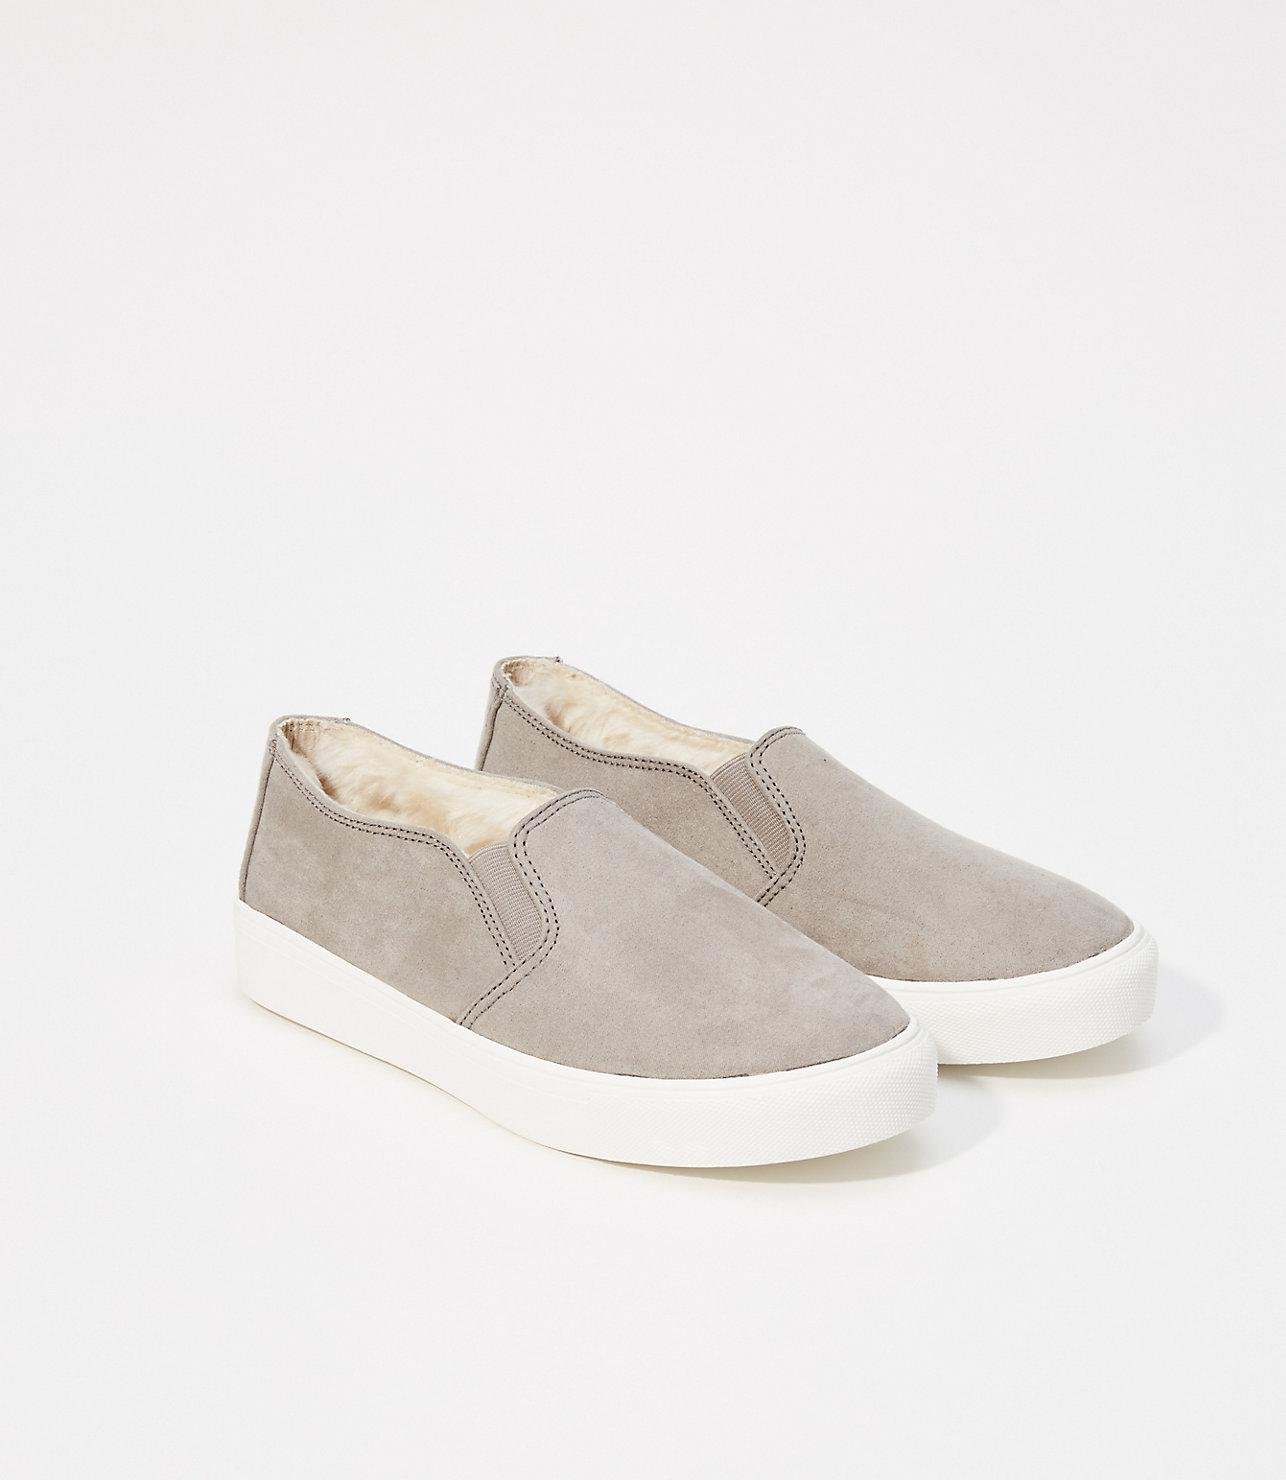 fur lined slip on shoes cheap online